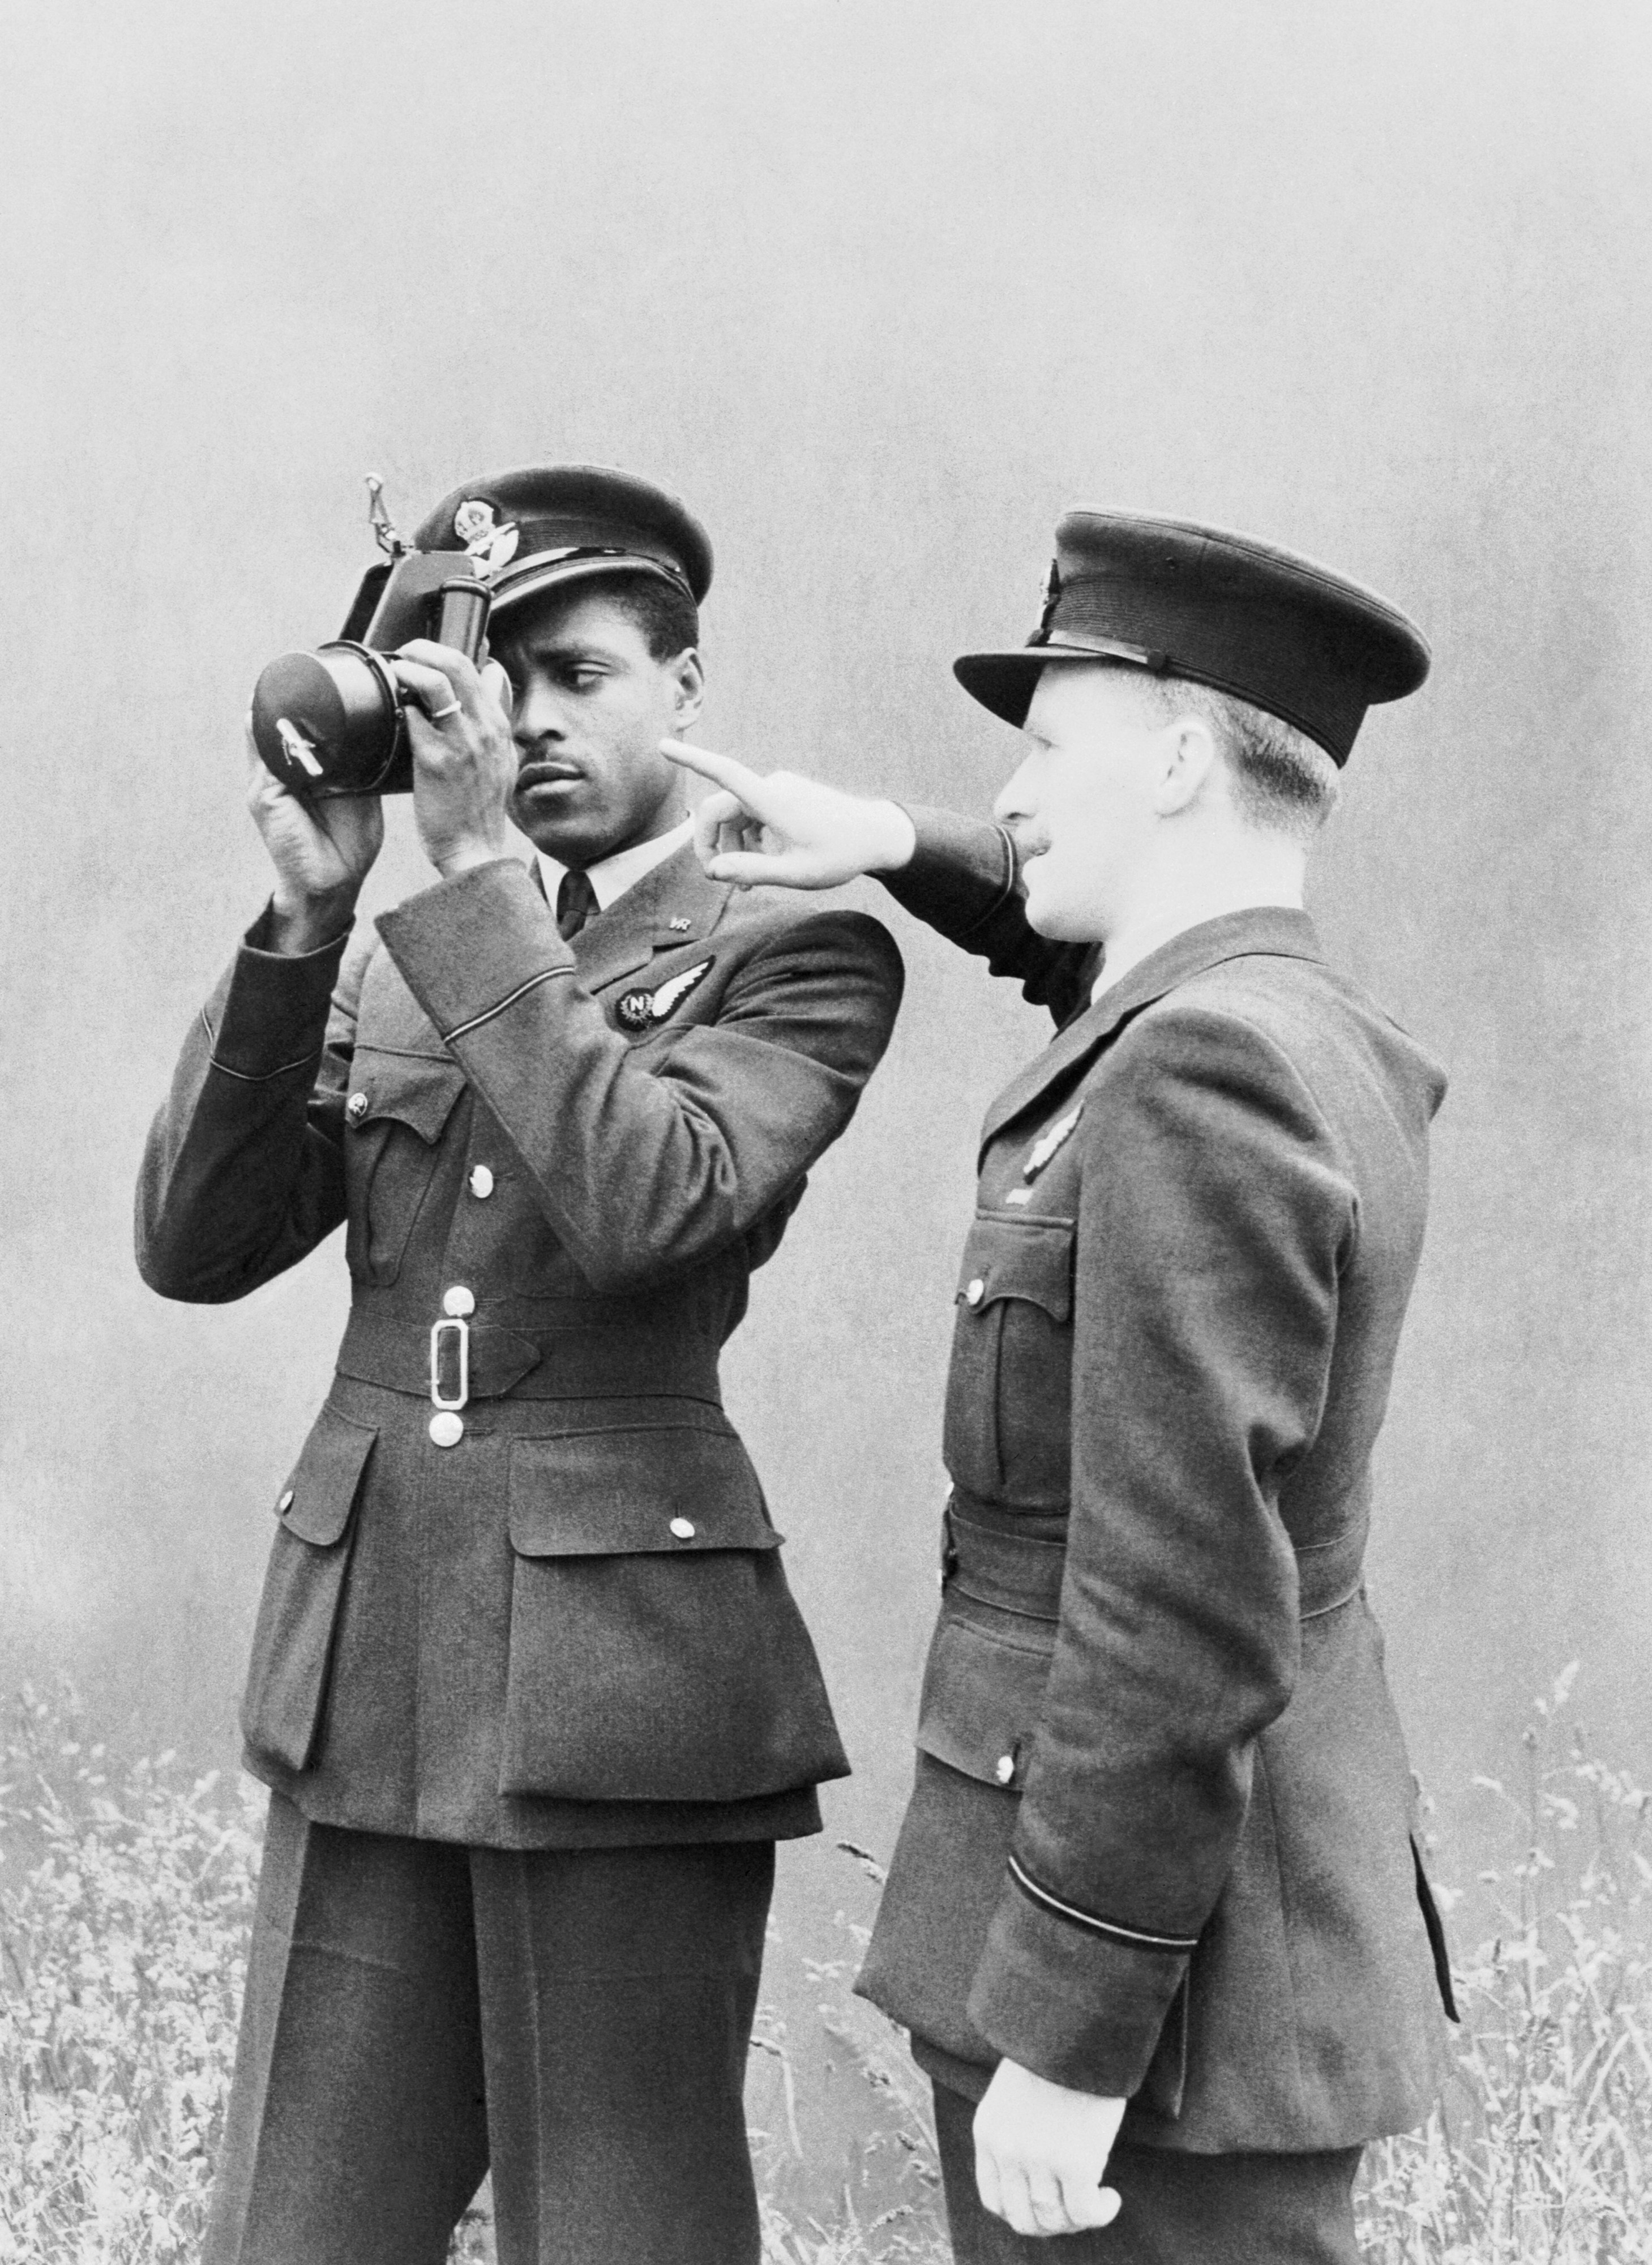 Pilot Officer J H Smythe of Sierra Leone, a newly-qualified navigator, being instructed in the use of the sextant by an instructor at No. 11 Operational Training Unit, Westcott in Buckinghamshire, 1 August 1943. CH10740